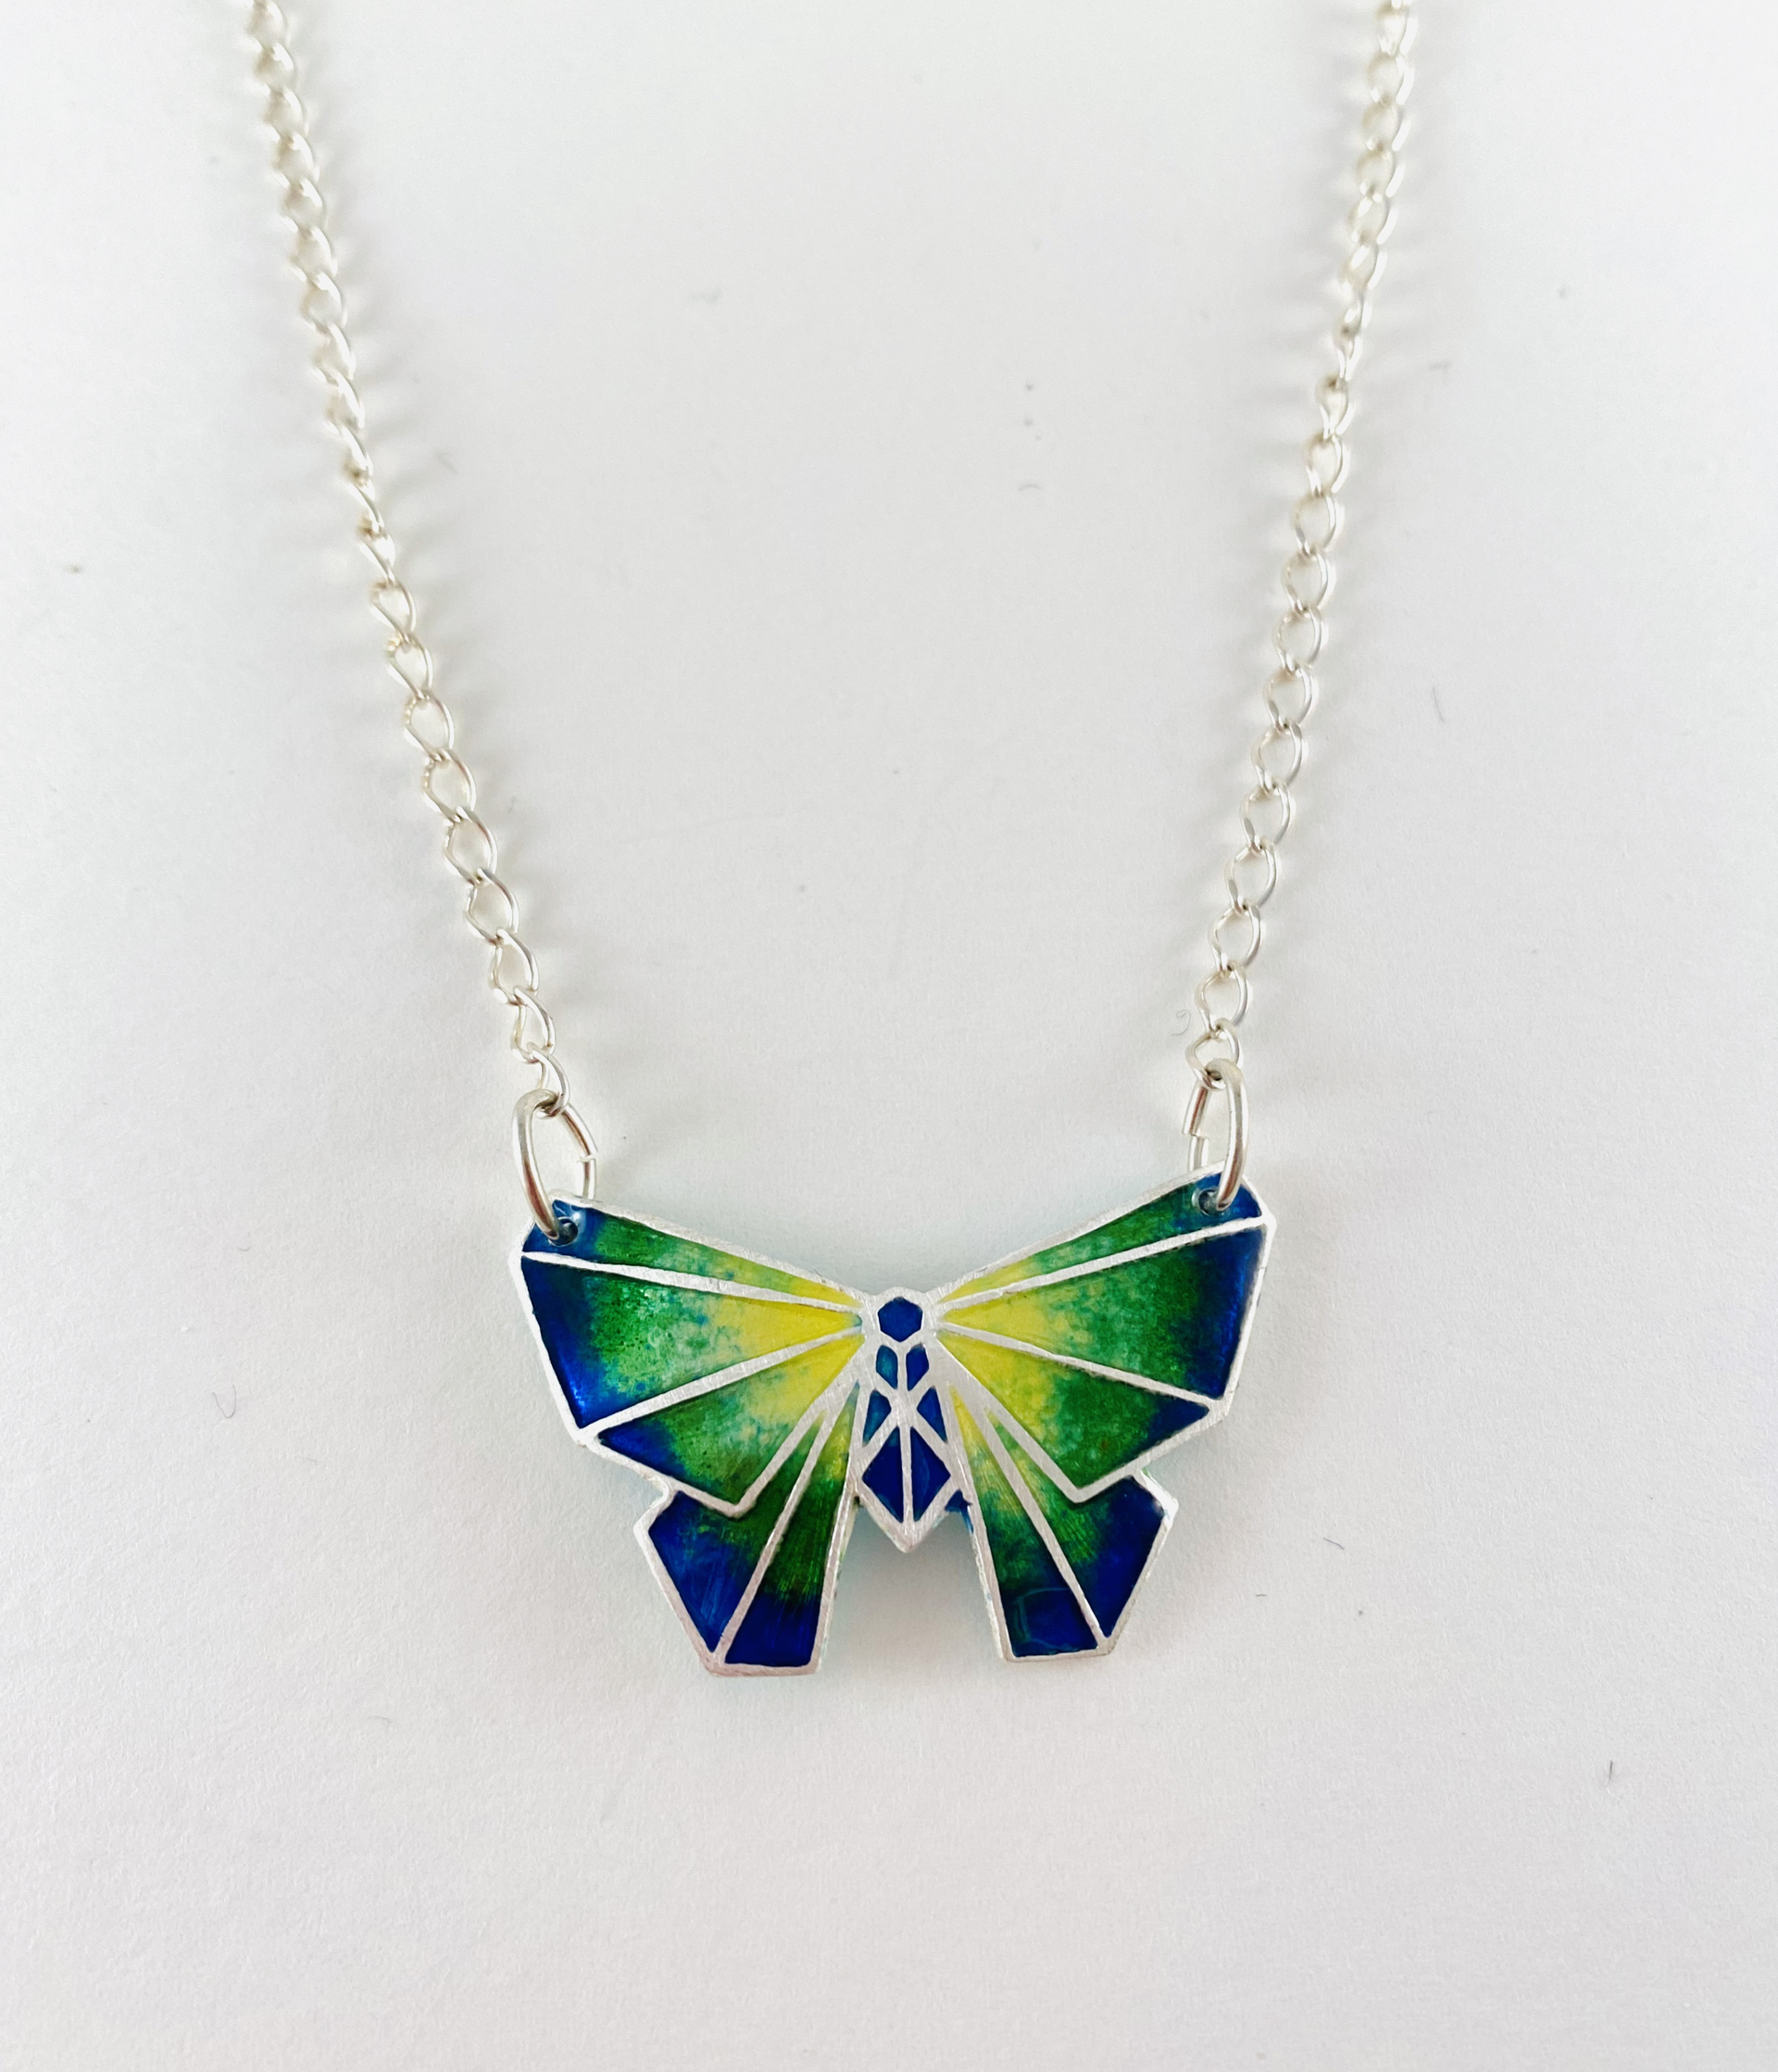 Champleve Butterfly Pendant, Silver 18" Chain Necklace by Karen Hakim